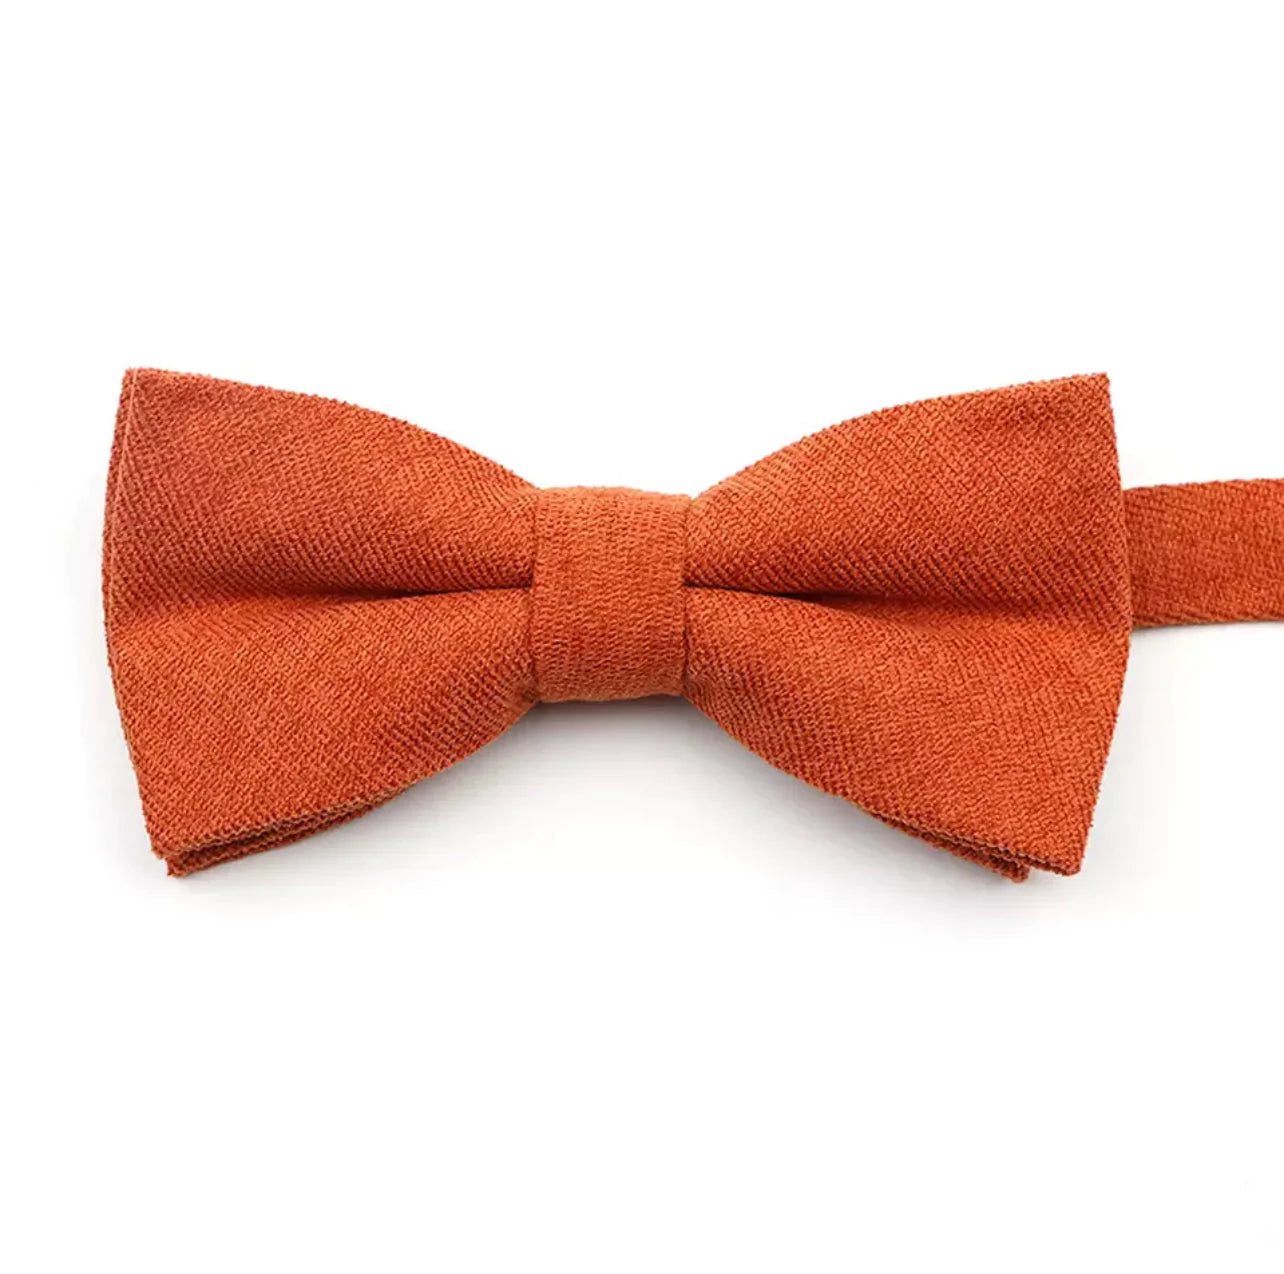 Red Orange Bow Tie (Pretied) for Adults - SAFFRON by MYTIESHOP-Red Orange Bow Tie (Pretied) for Adults Strap is Adjustable - 32CM Long (10-18 Inches) Pre-Tied bowtie Bow Tie 12CM * 6CMMade from Cotton Great for Weddings Events Family Shoots Styled Shoots Wedding Photography Walking in weddings Mens Bow Tie great for weddings and events. Great for the Groom and Groomsmen to wear at the wedding. Serves as a great gift idea; for anniversaries or wedding presents. Looks great in styled shoots and we